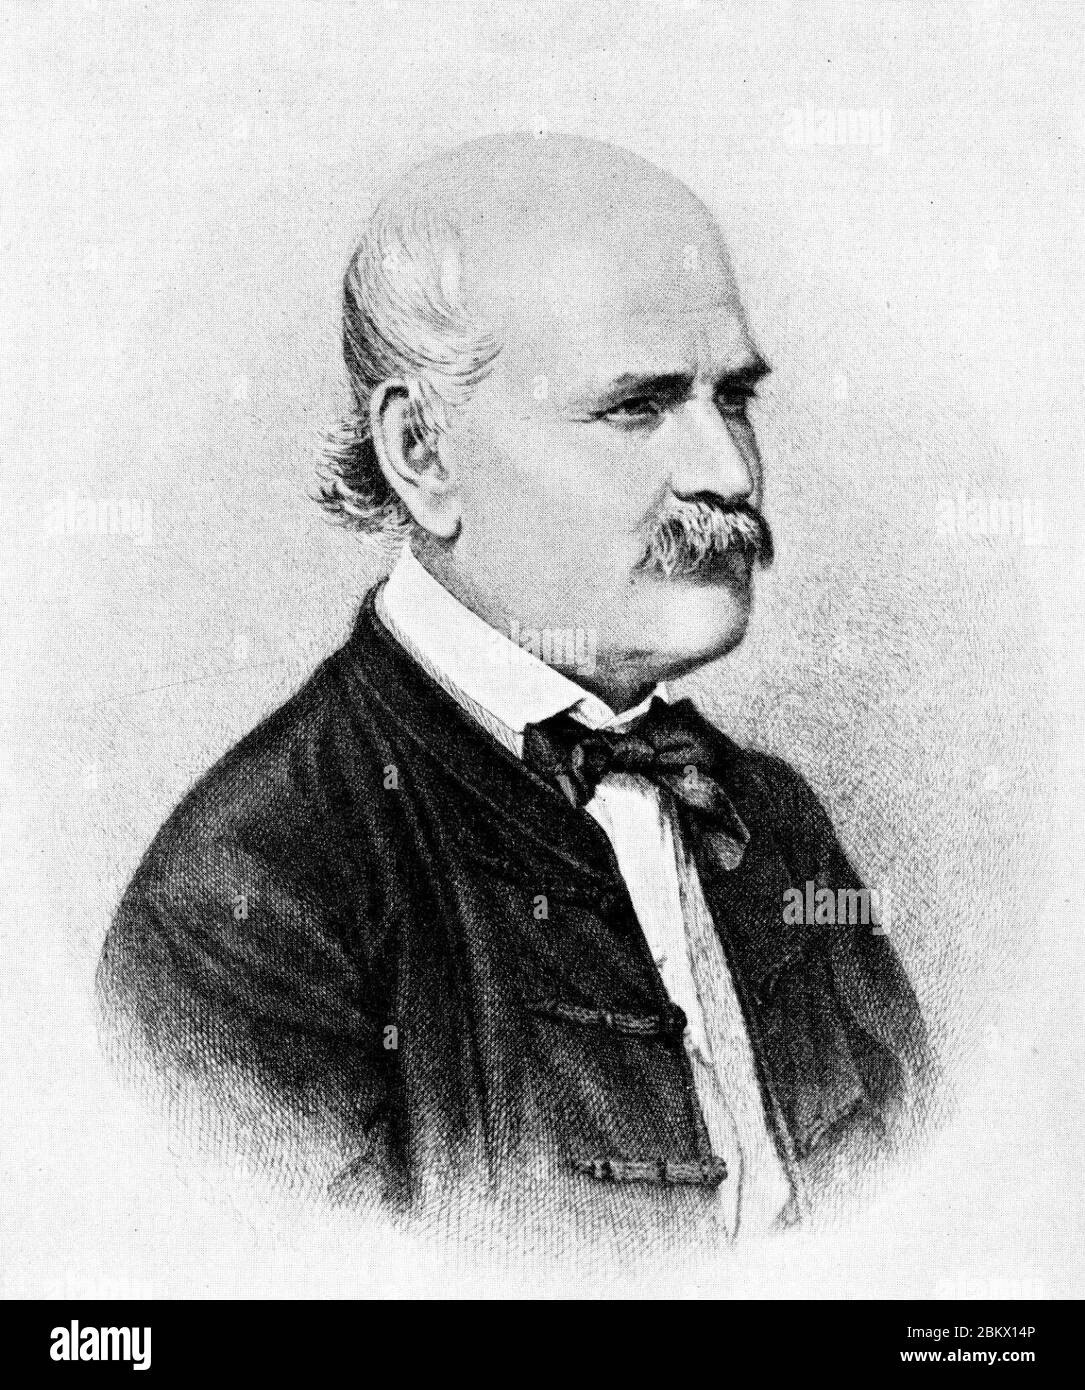 Ignaz Semmelweis High Resolution Stock Photography and Images - Alamy